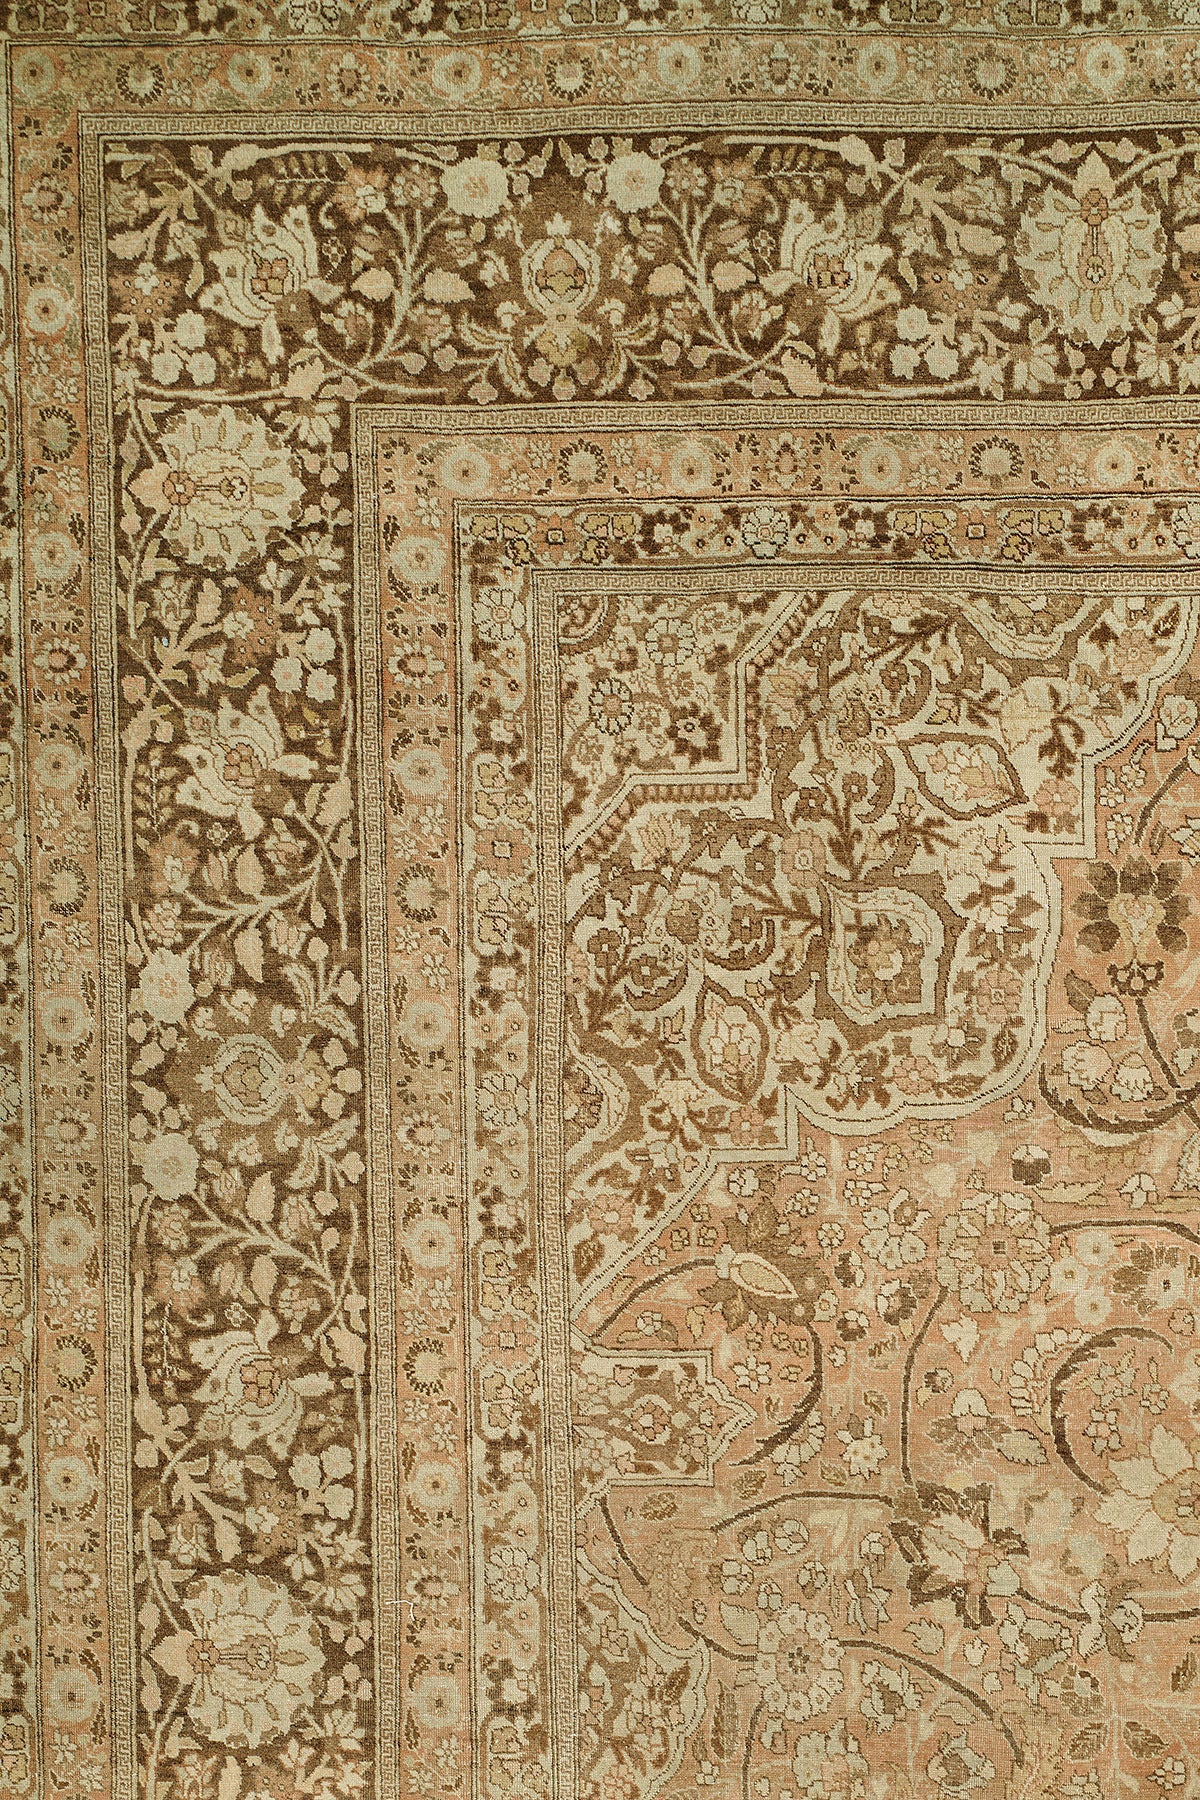 Hand-Woven Elegant Palace Size Antique Persian Tabriz For Sale